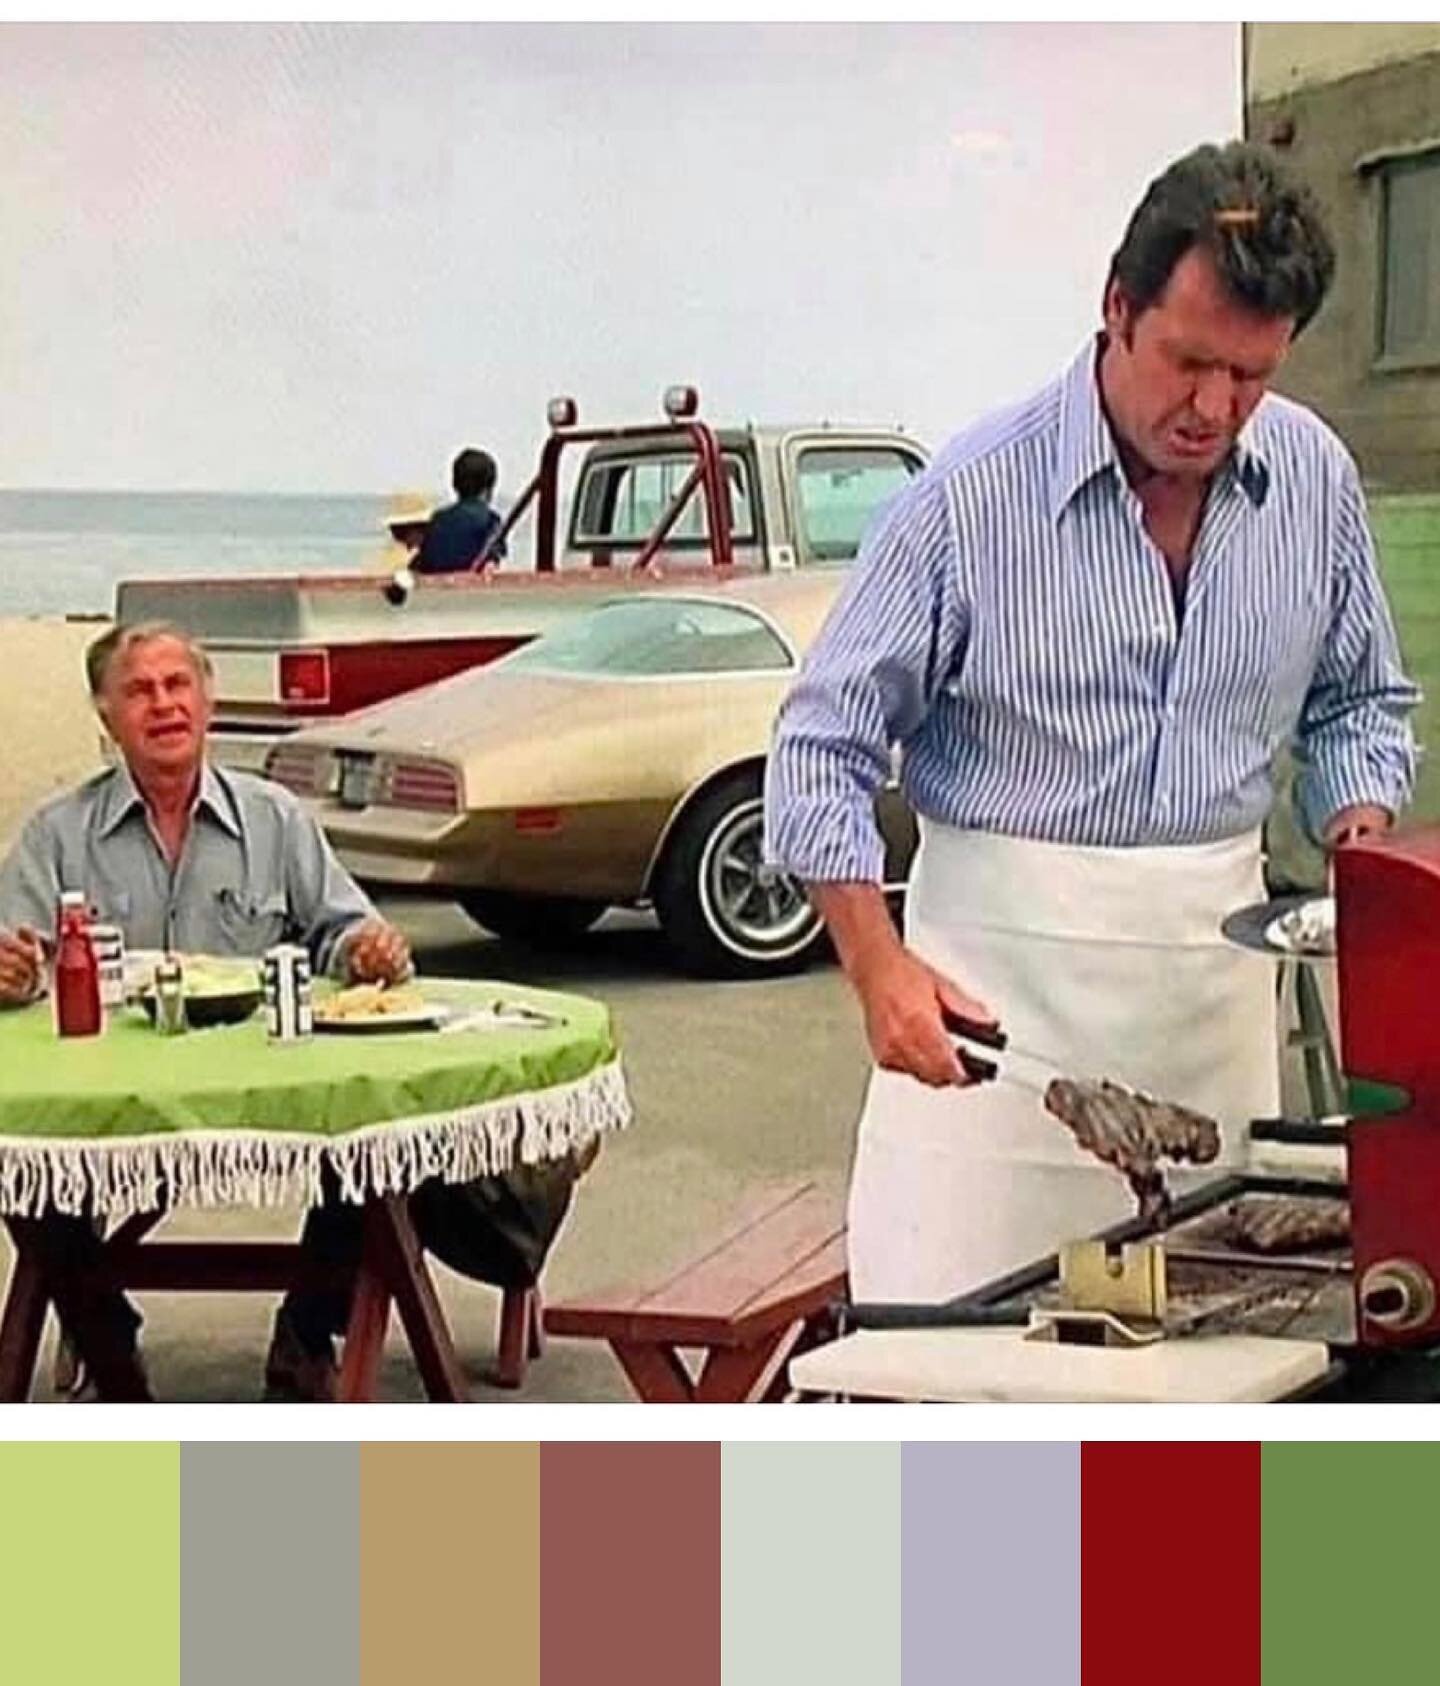 When I was young I thought James Rockford and his style of living was the epitome of a life well lived. Looking at this photo it seems I was right.
#artdirector  #livingwell  #vintagedesign  #rockfordfiles  #colorpalette #vintagecolorpalette